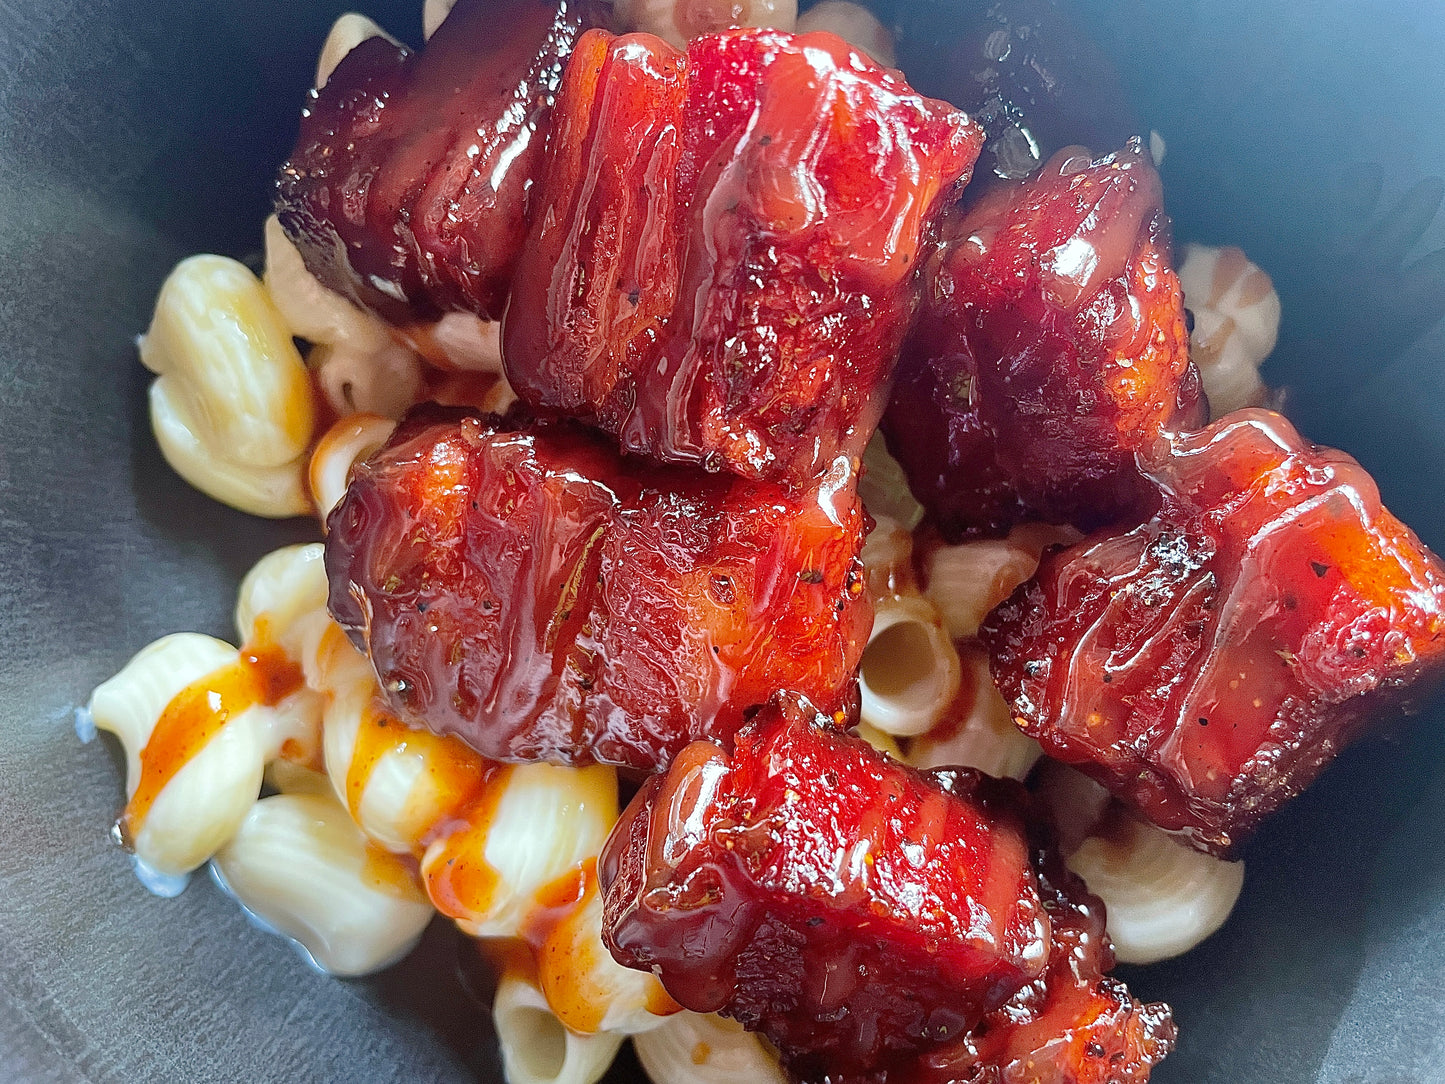 The best seasoning; this Bacon Honey Hog burnt ends over mac and cheese